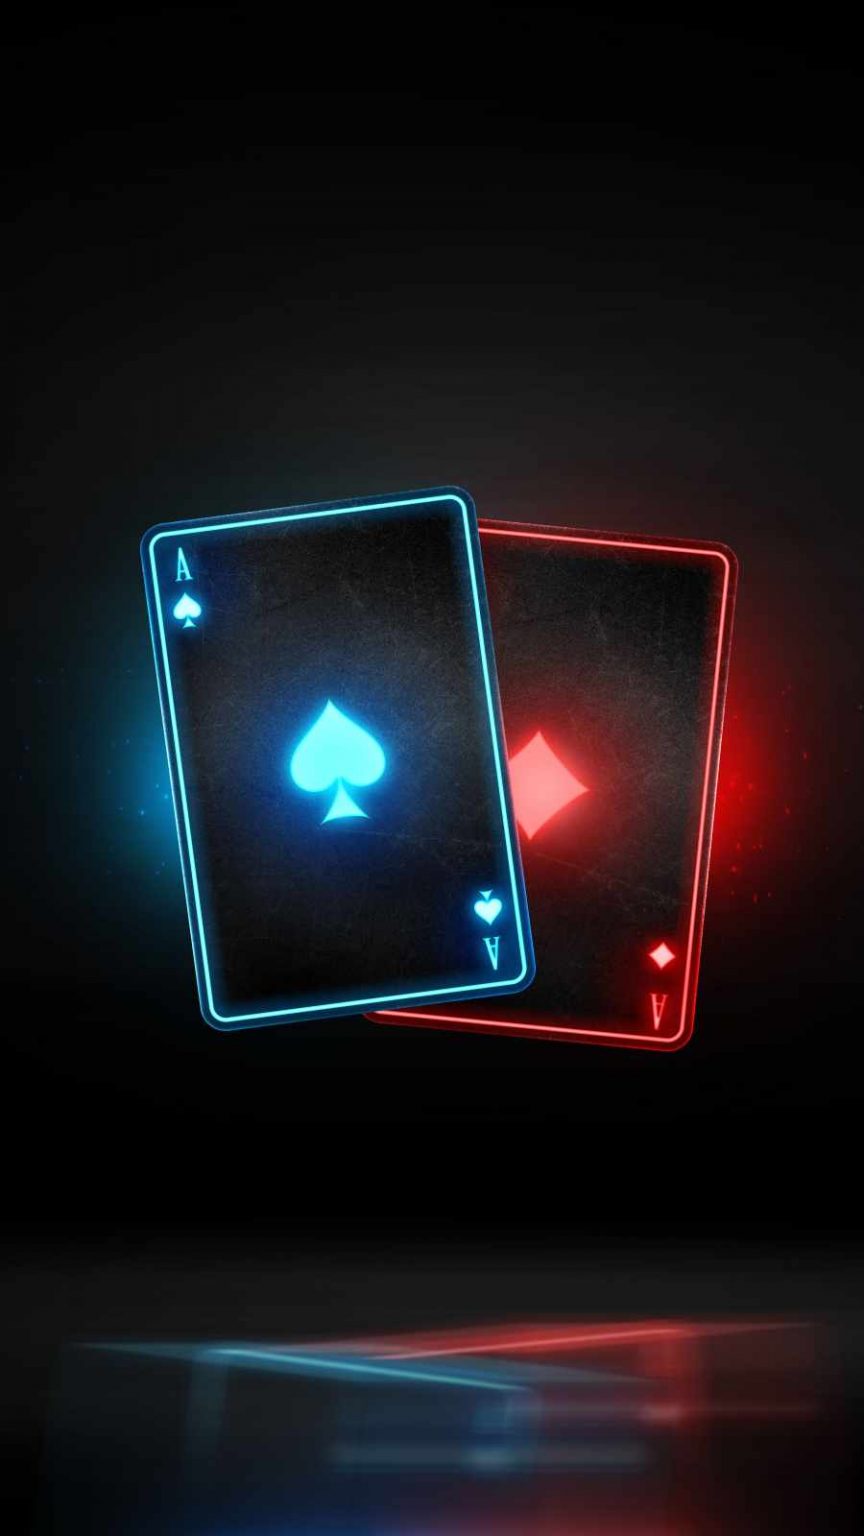 Neon Ace Cards IPhone Wallpaper - IPhone Wallpapers : iPhone Wallpapers